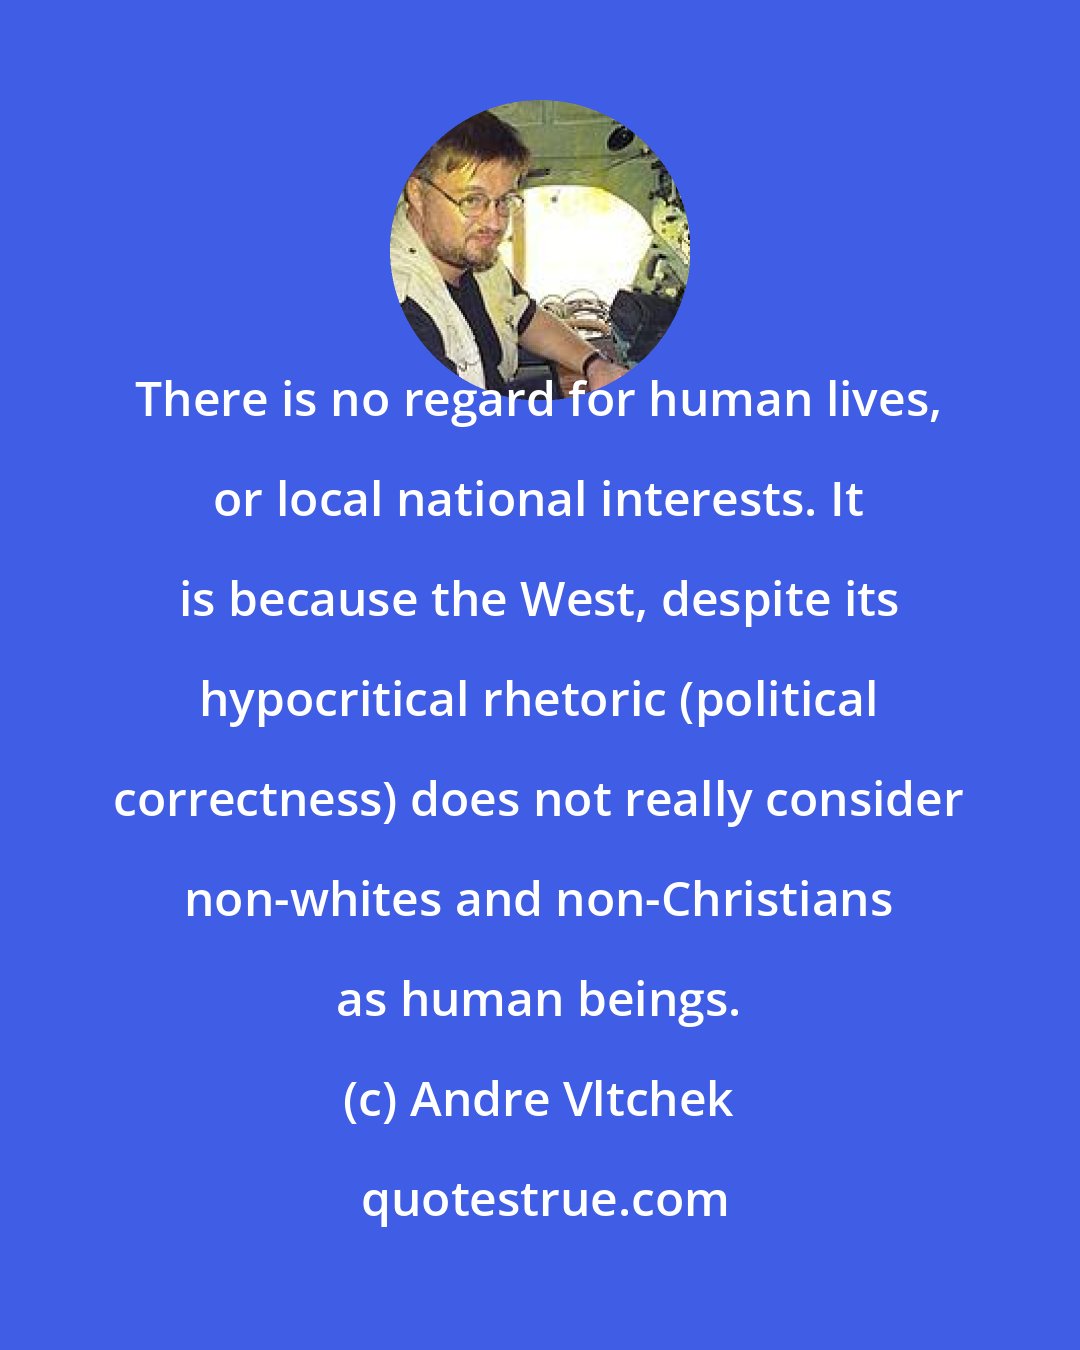 Andre Vltchek: There is no regard for human lives, or local national interests. It is because the West, despite its hypocritical rhetoric (political correctness) does not really consider non-whites and non-Christians as human beings.